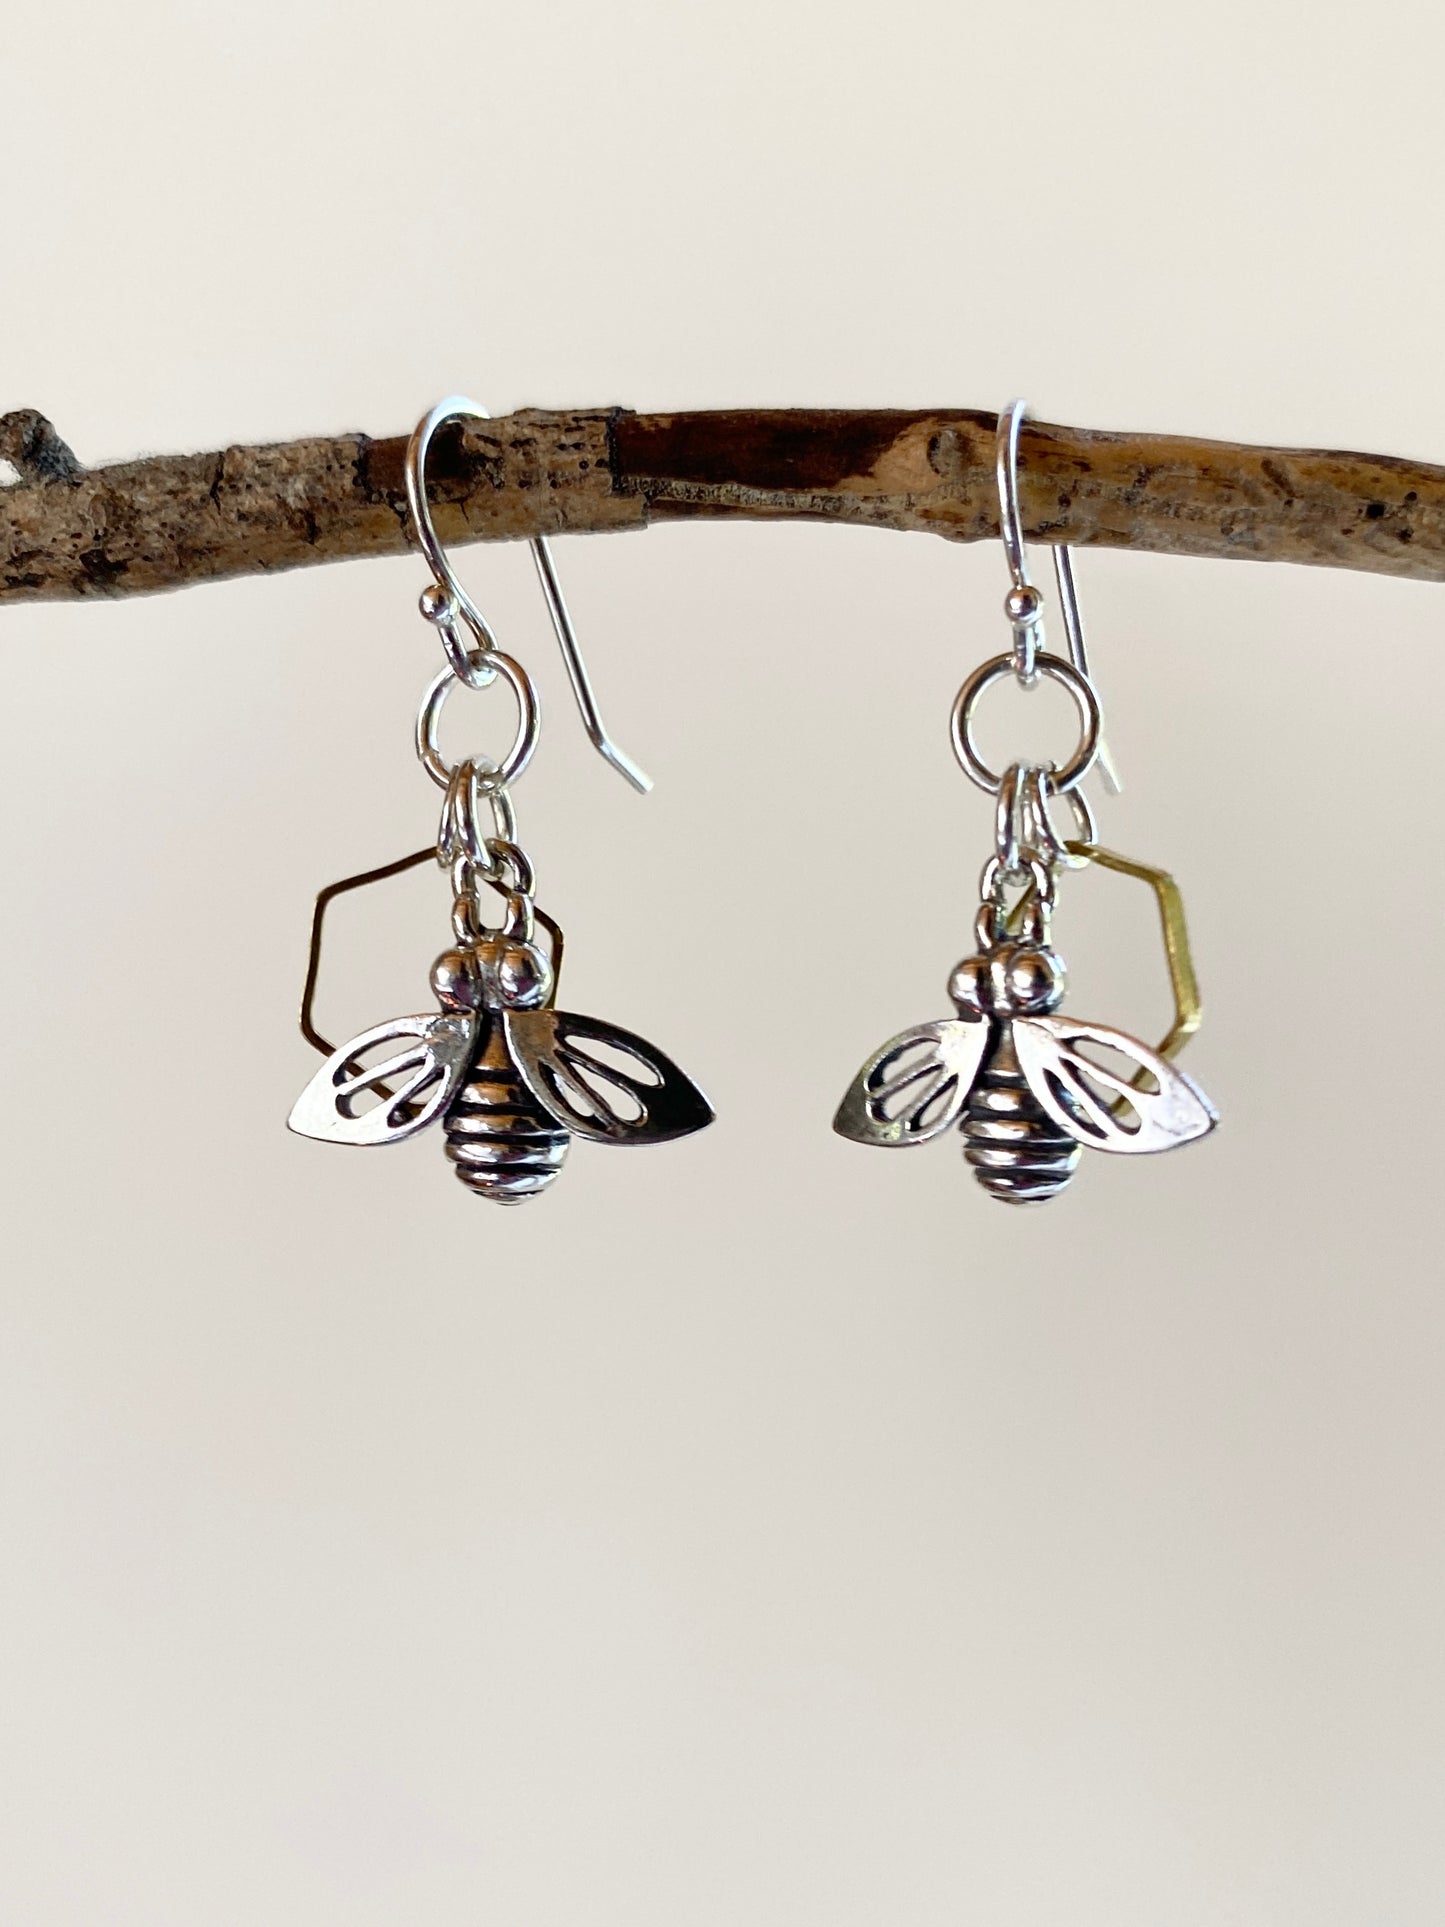 Busy Bee Earrings ~ Sterling Silver and Brass Bee and Honeycomb Charm Earrings